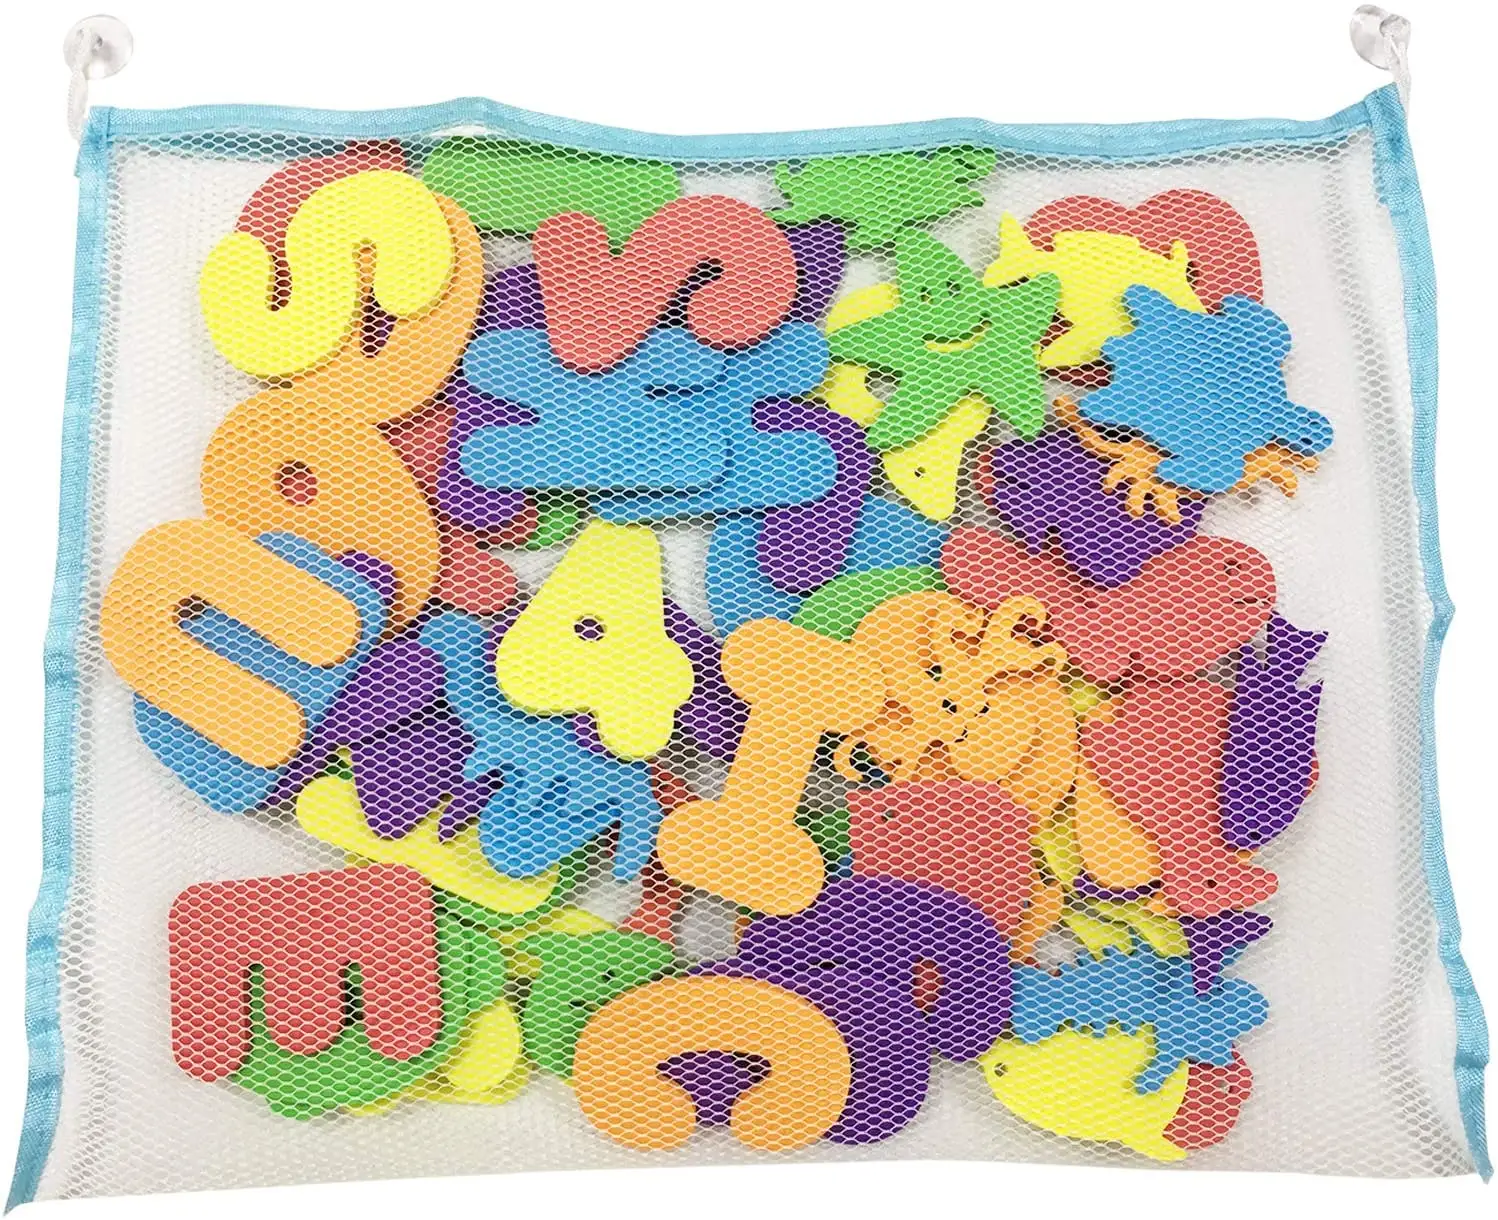 2021 New Foam Manufacturer Wholesale Letters Alphabet Numbers Animals Toys For Kids Bath Time Fun Bath Toys